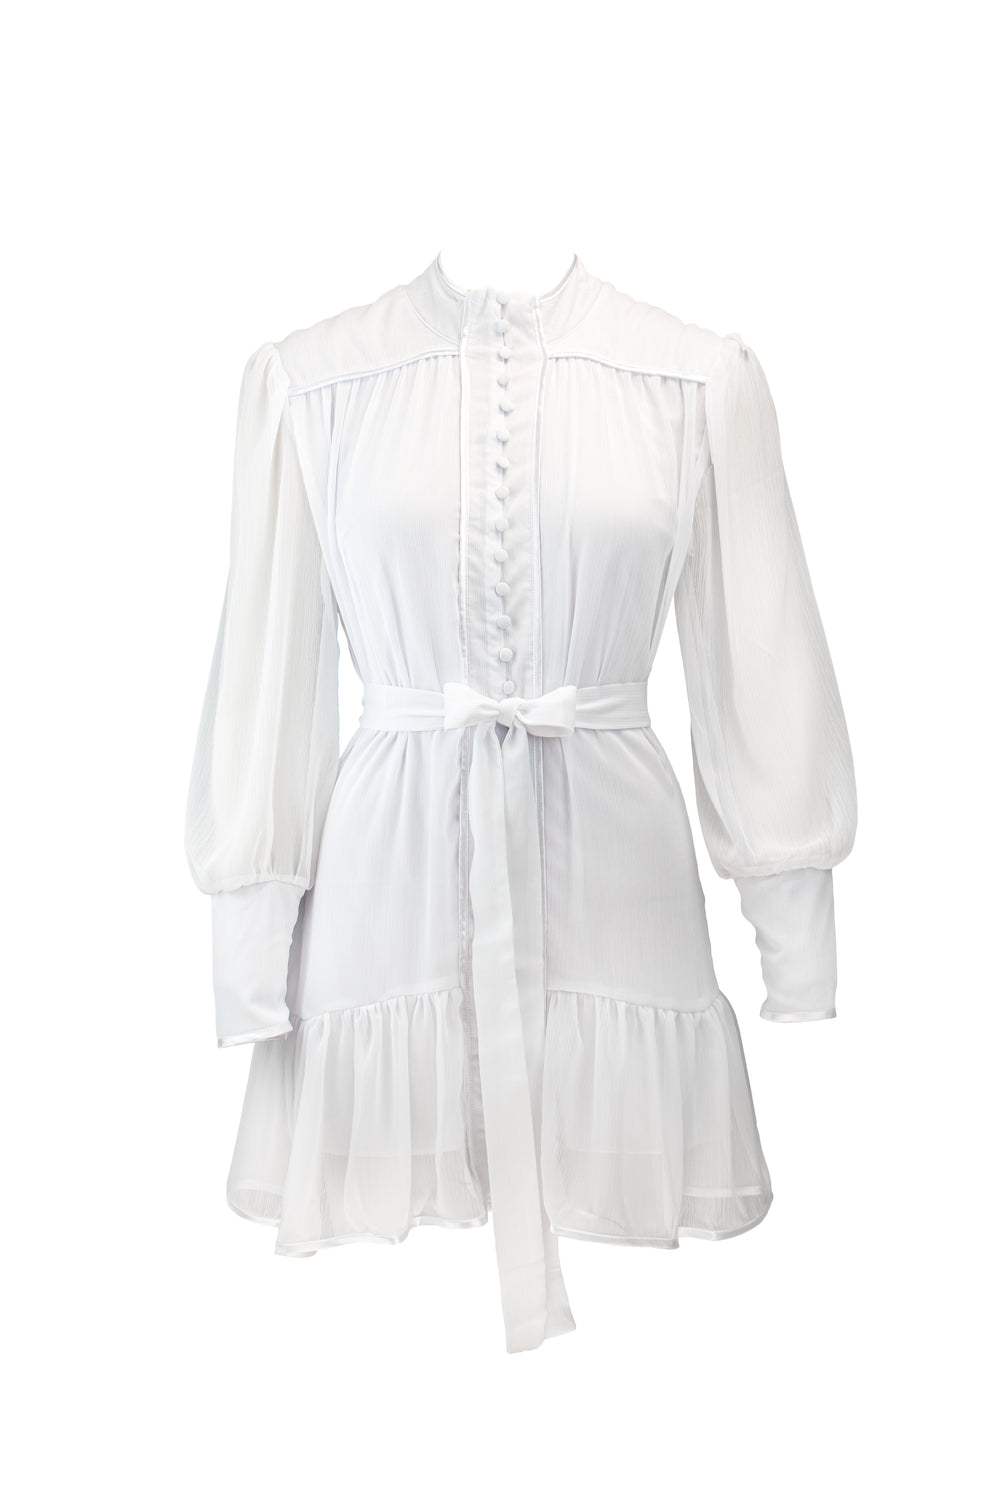 I LOVE BUTTONS DRESS - White